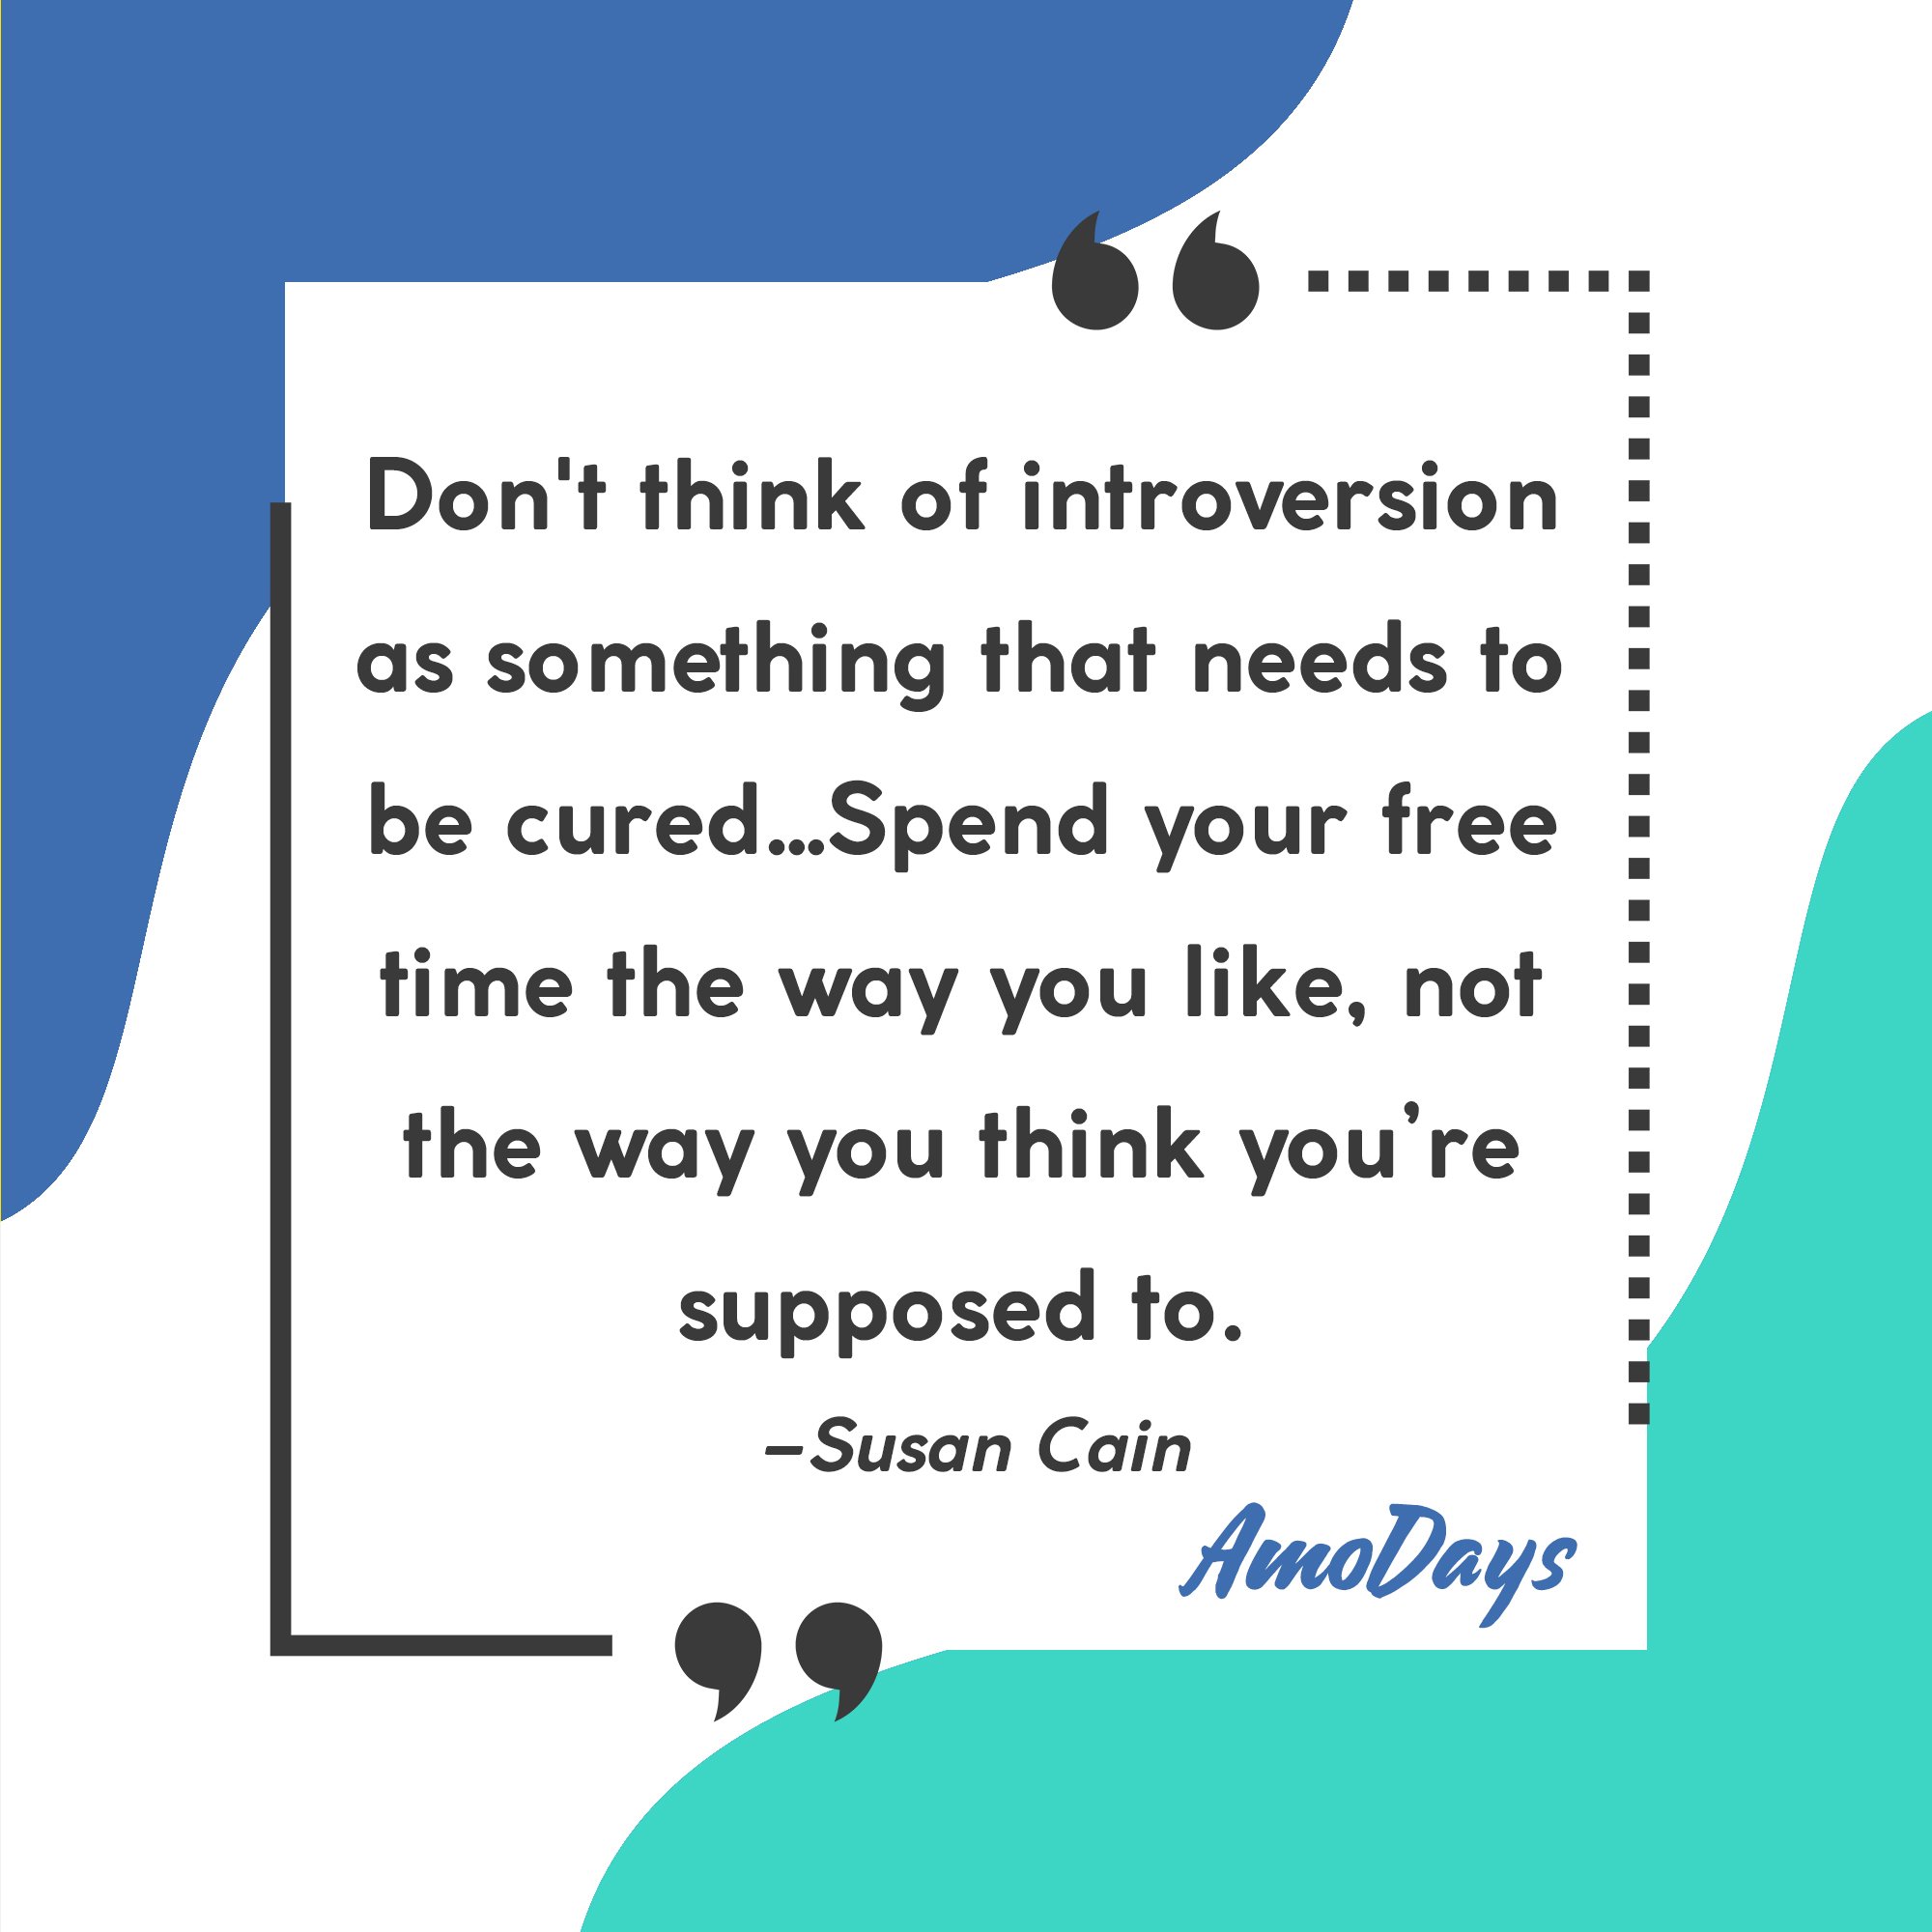 Susan Cain's quote ''Don't think of introversion as something that needs to be cured…Spend your free time the way you like, not the way you think you’re supposed to." | Image: AmoDays